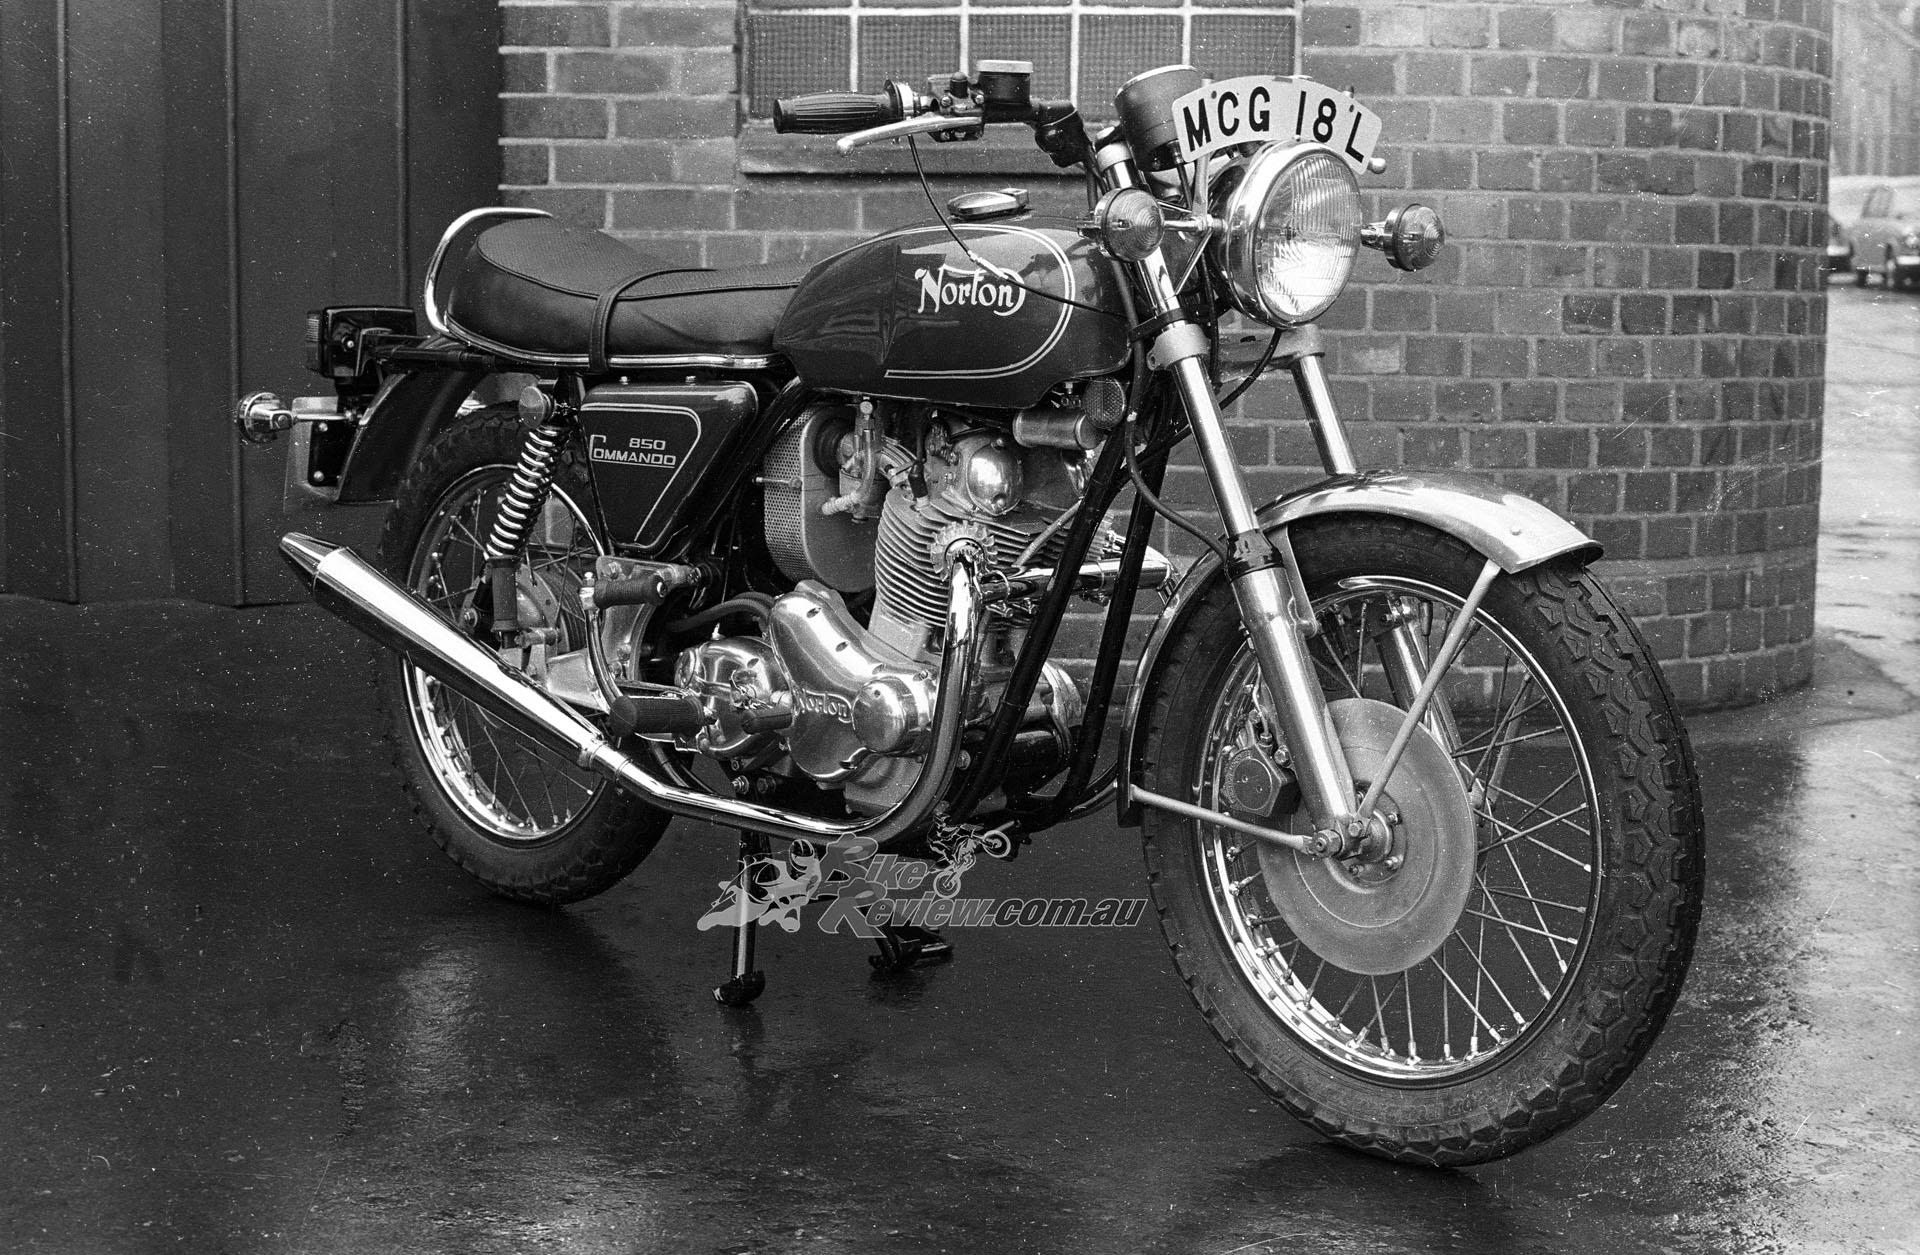 Norton was due to launch its new 850 Commando range on 10 March when Motor Cycle was publishing a special edition in which road tests of the whole range would be included.